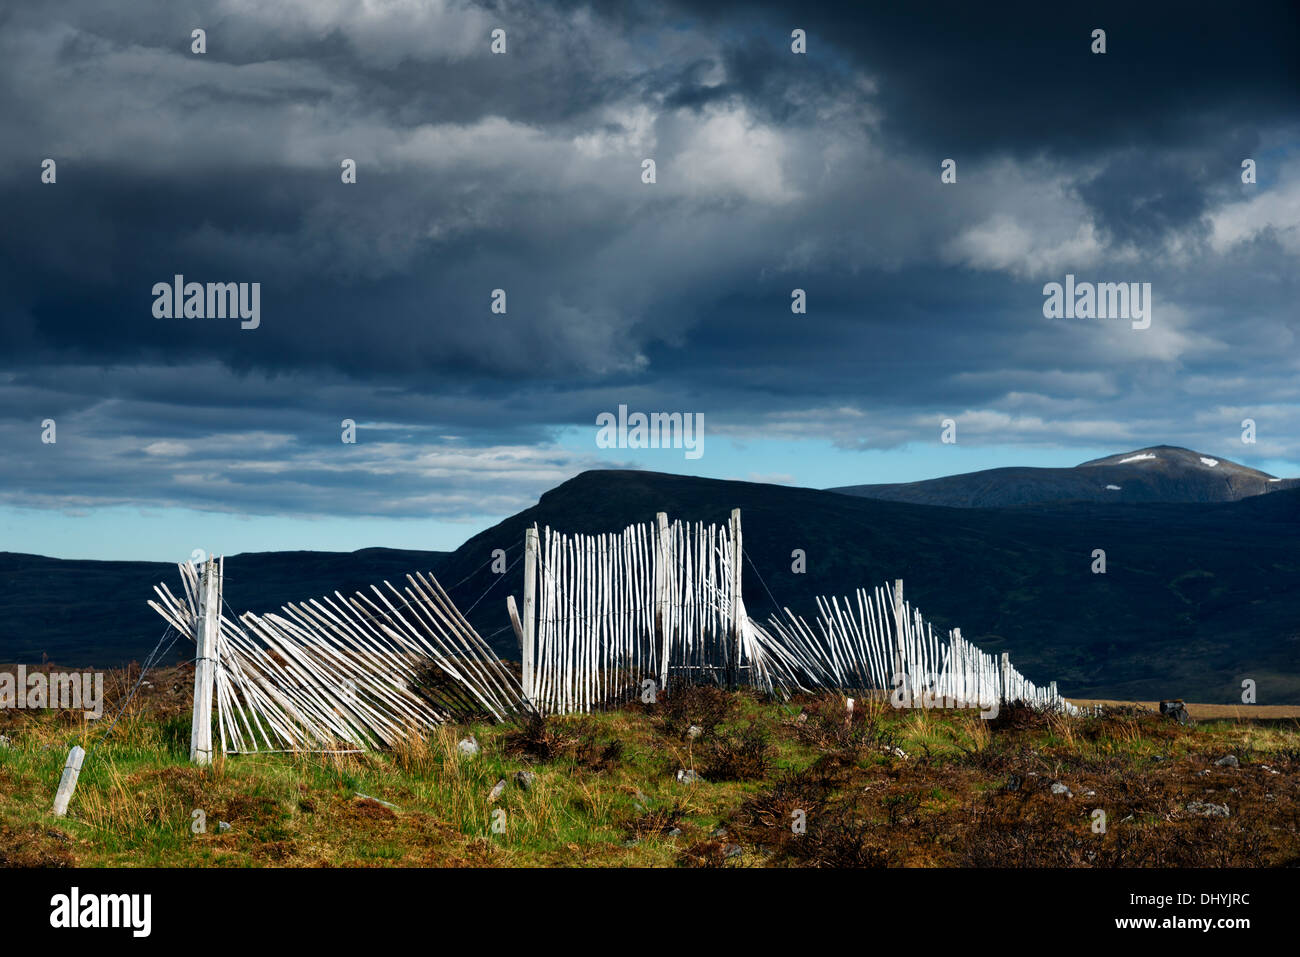 Broken wooden fence posts against the backdrop of the Northern Scottish Highlands just off the A835 Inverness to Ullapool road. Stock Photo